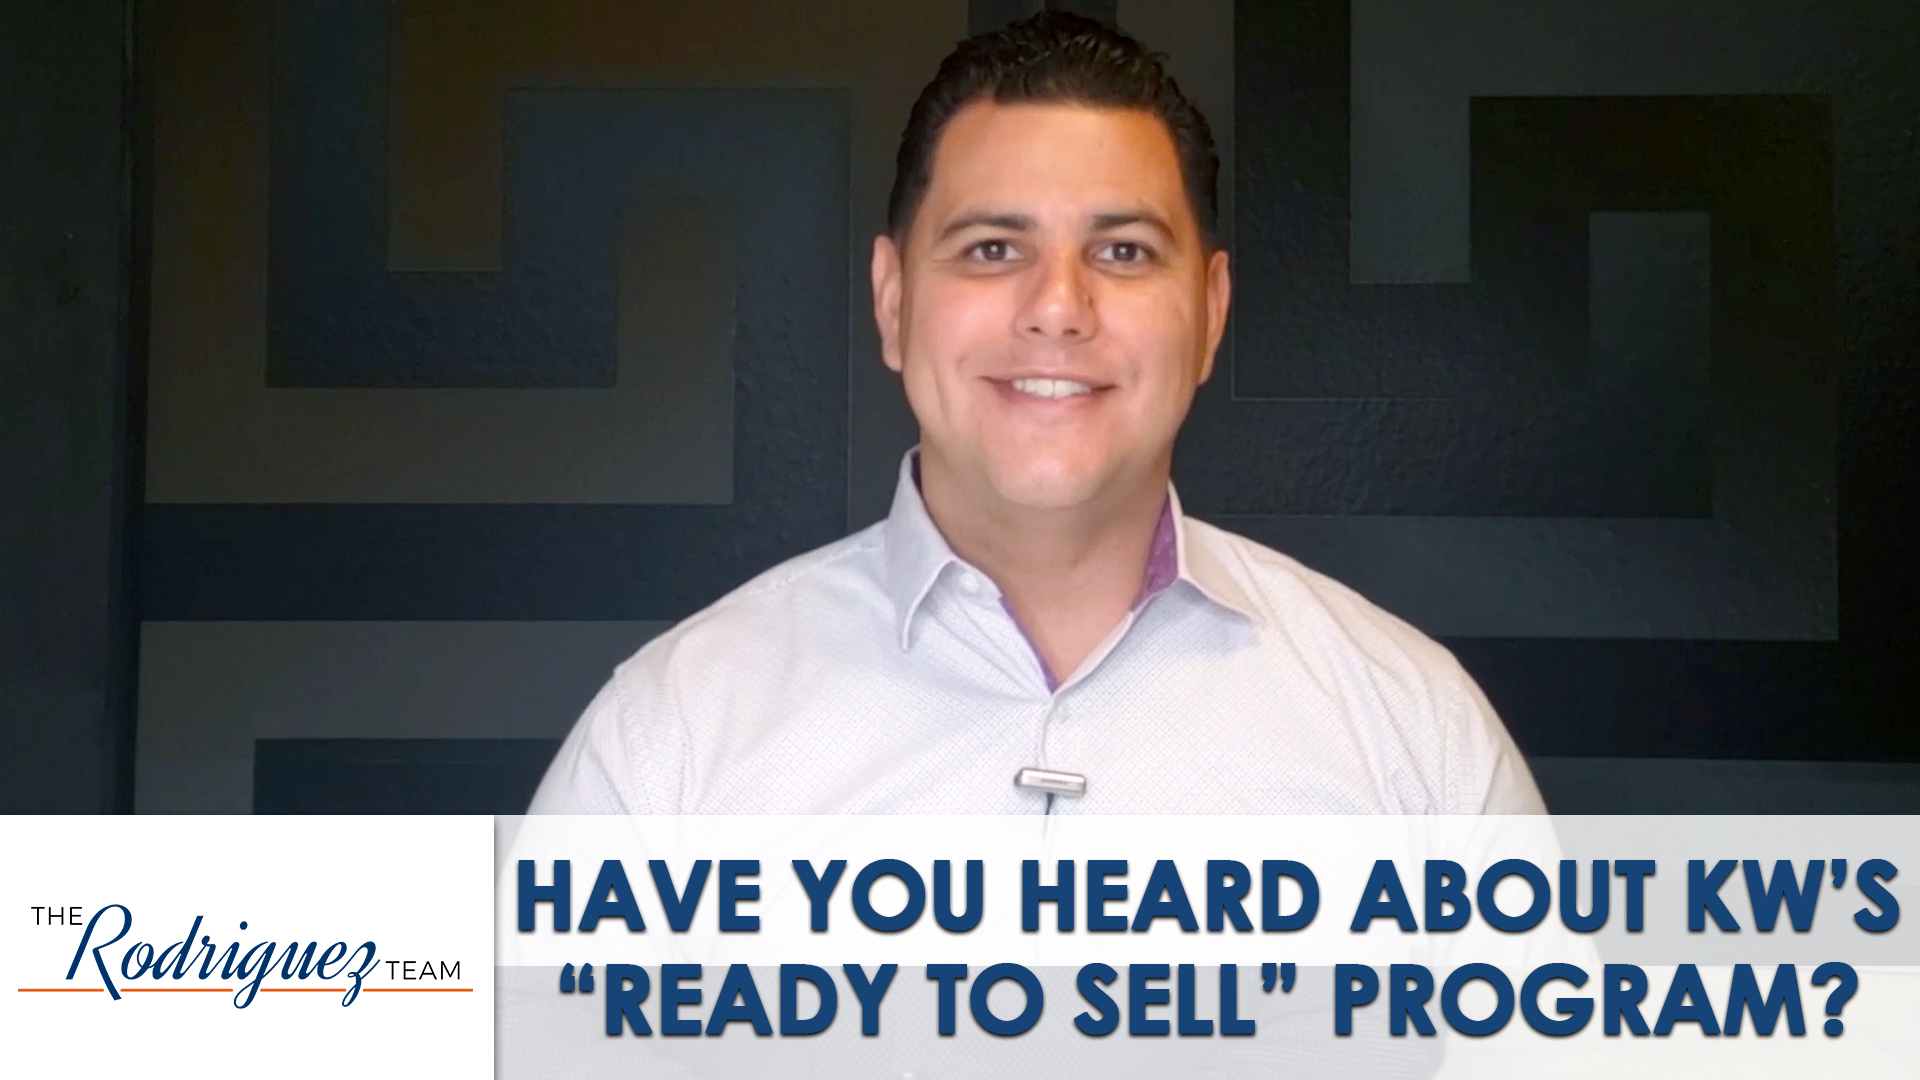 The Benefits of Keller Williams’ “Ready to Sell” Program